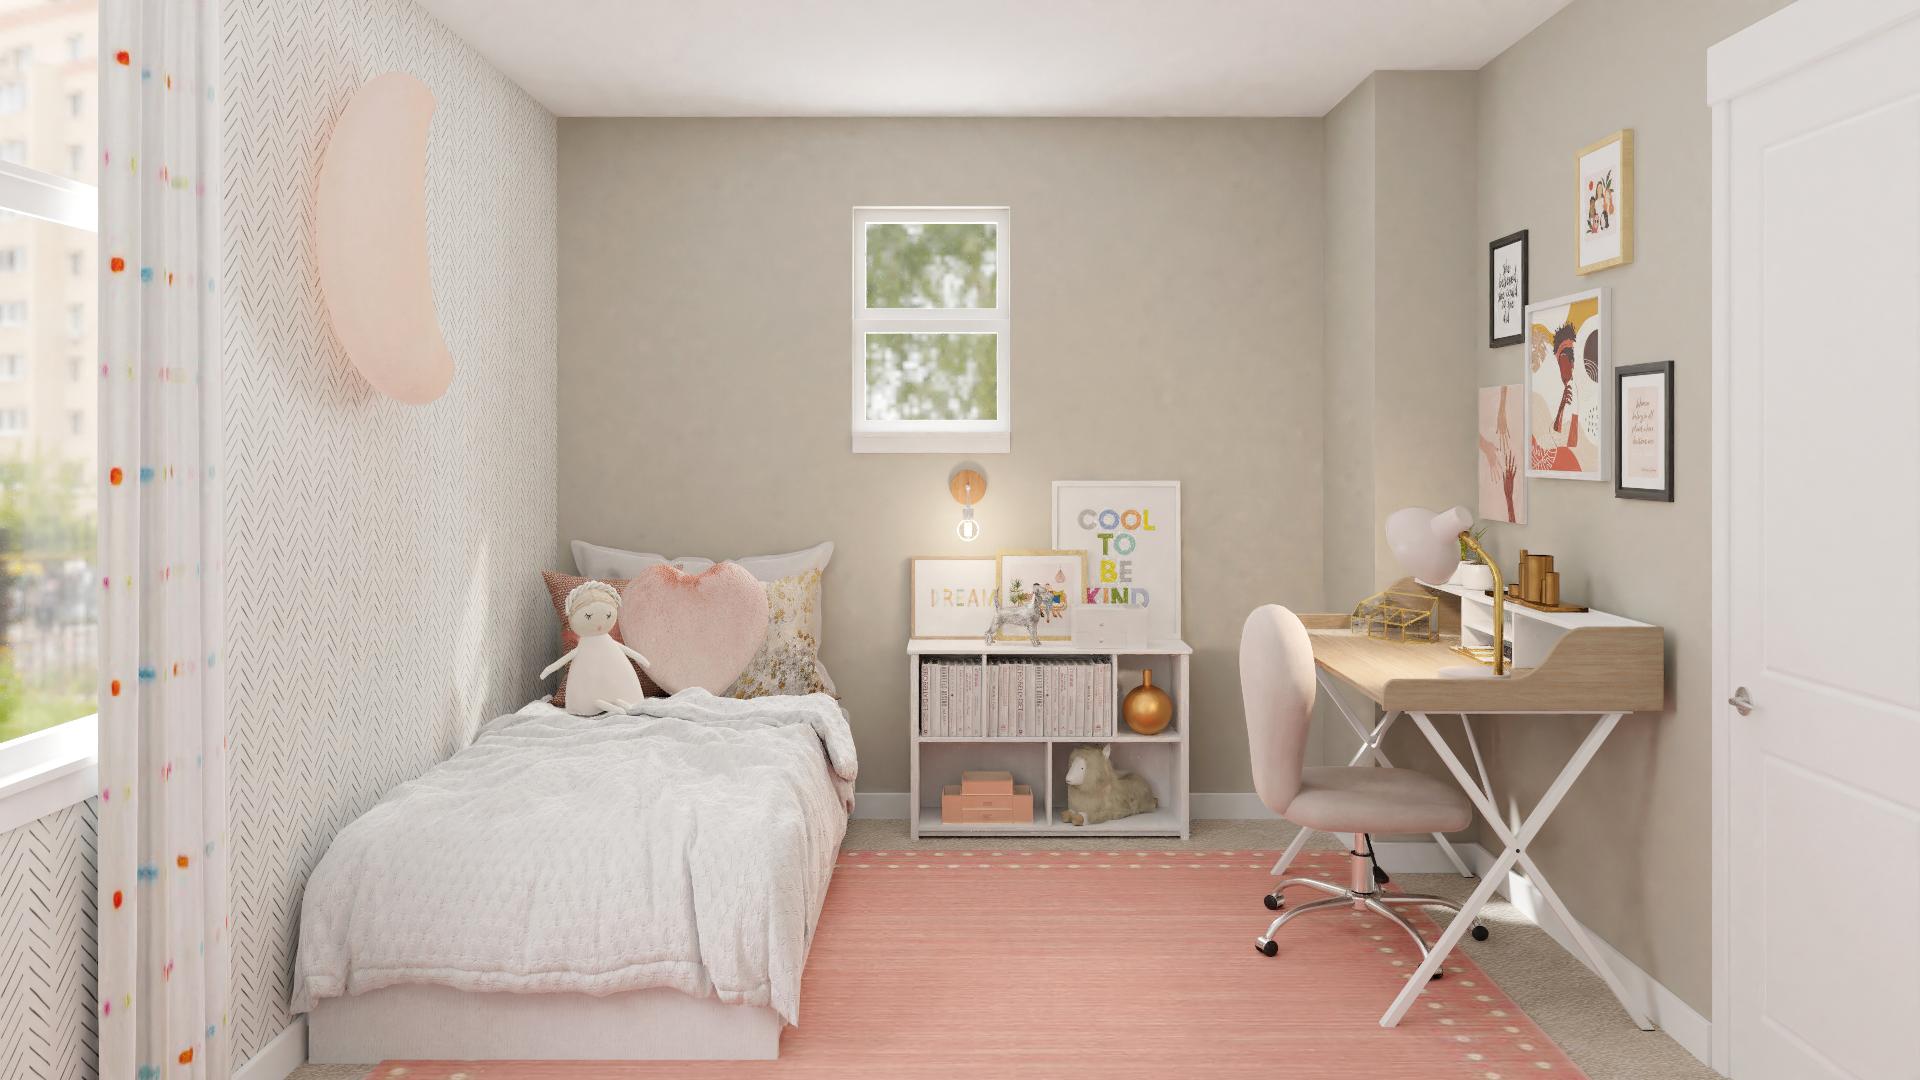 A Kids Bedroom With Modern Accents & Pastel Colors